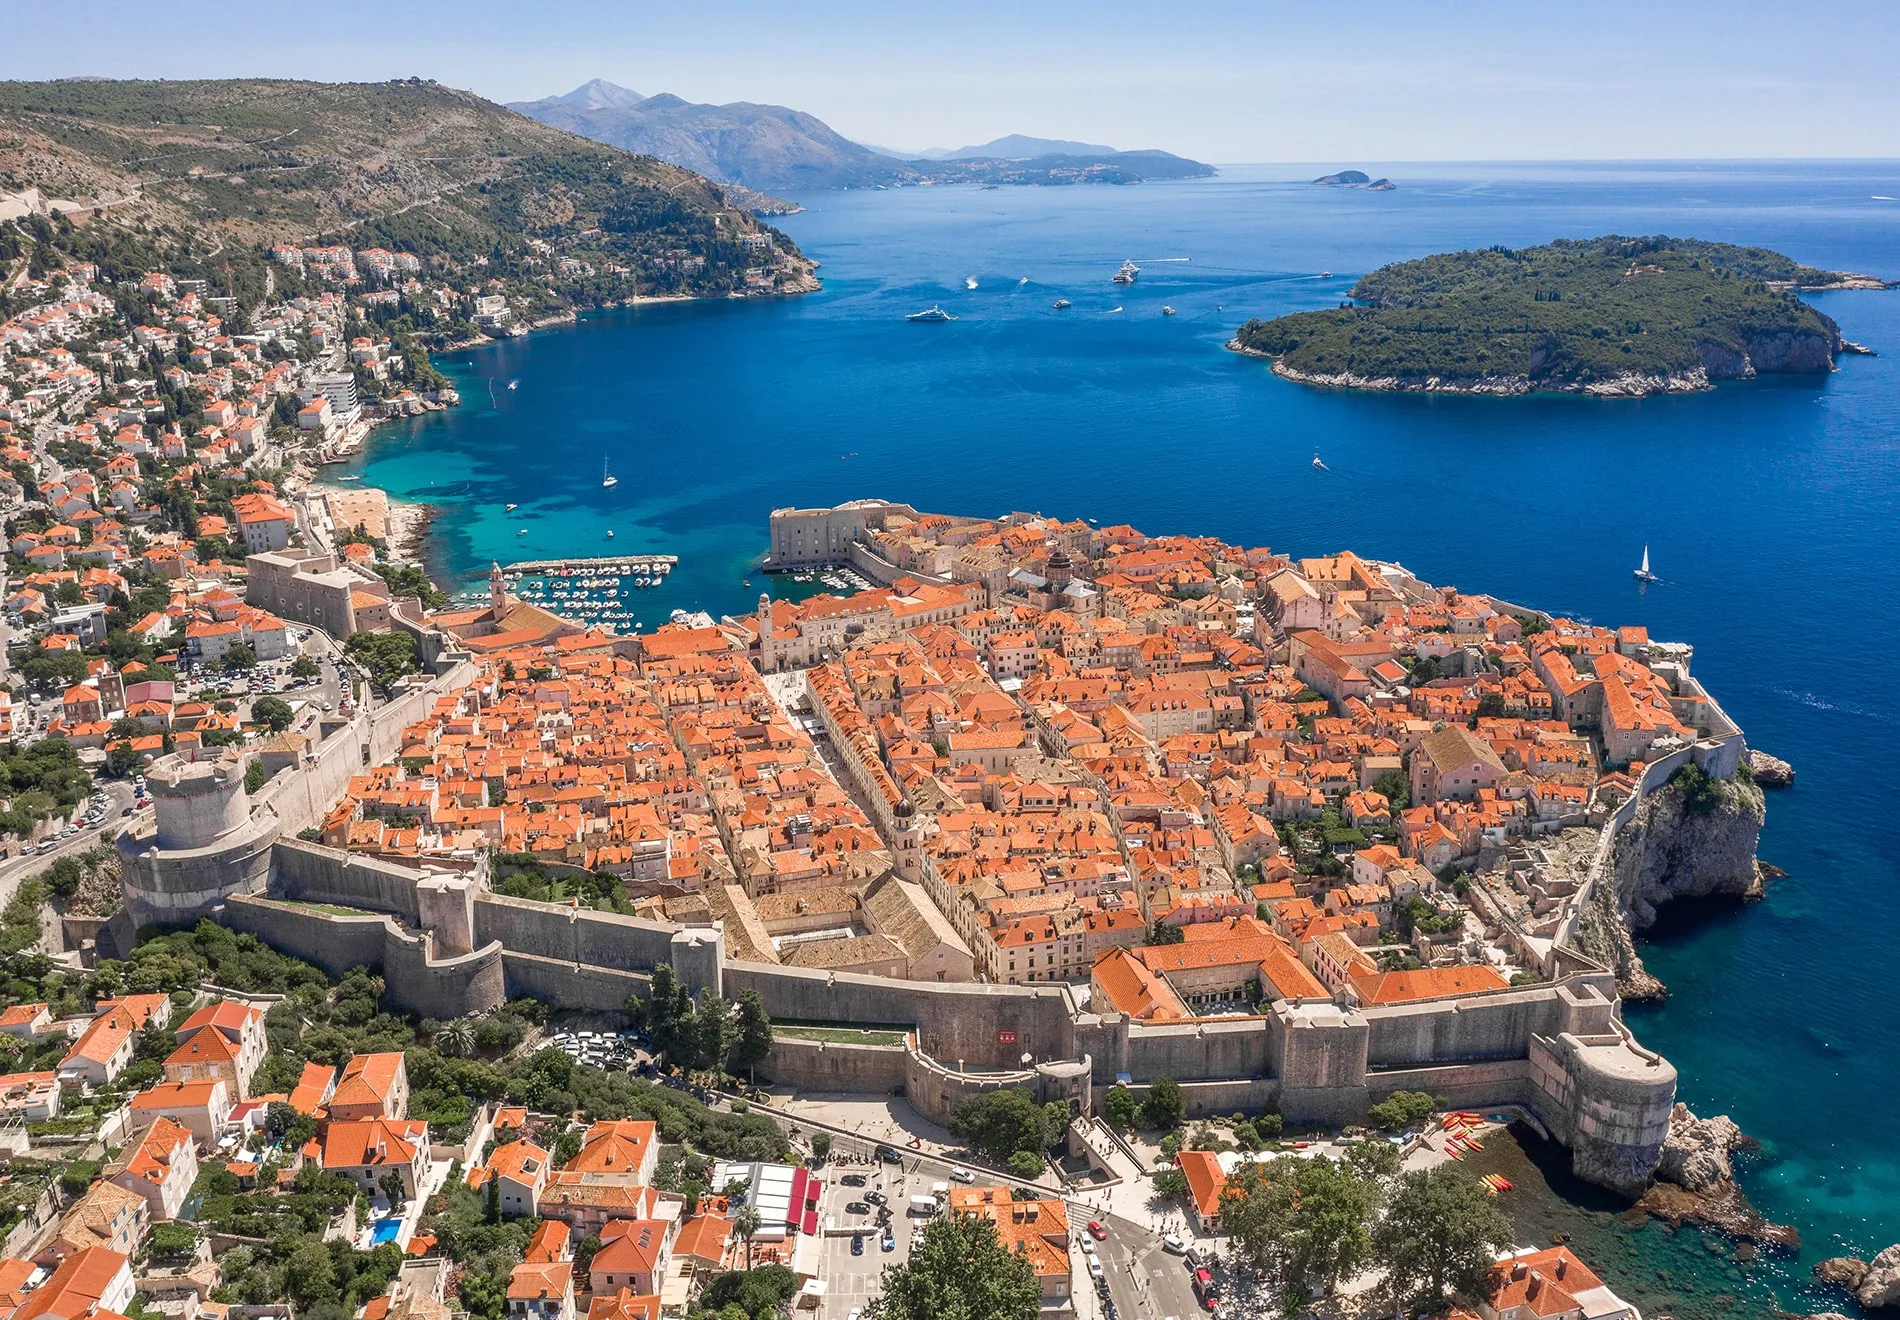 Dubrovnik - The »Pearl of the Adriatic«